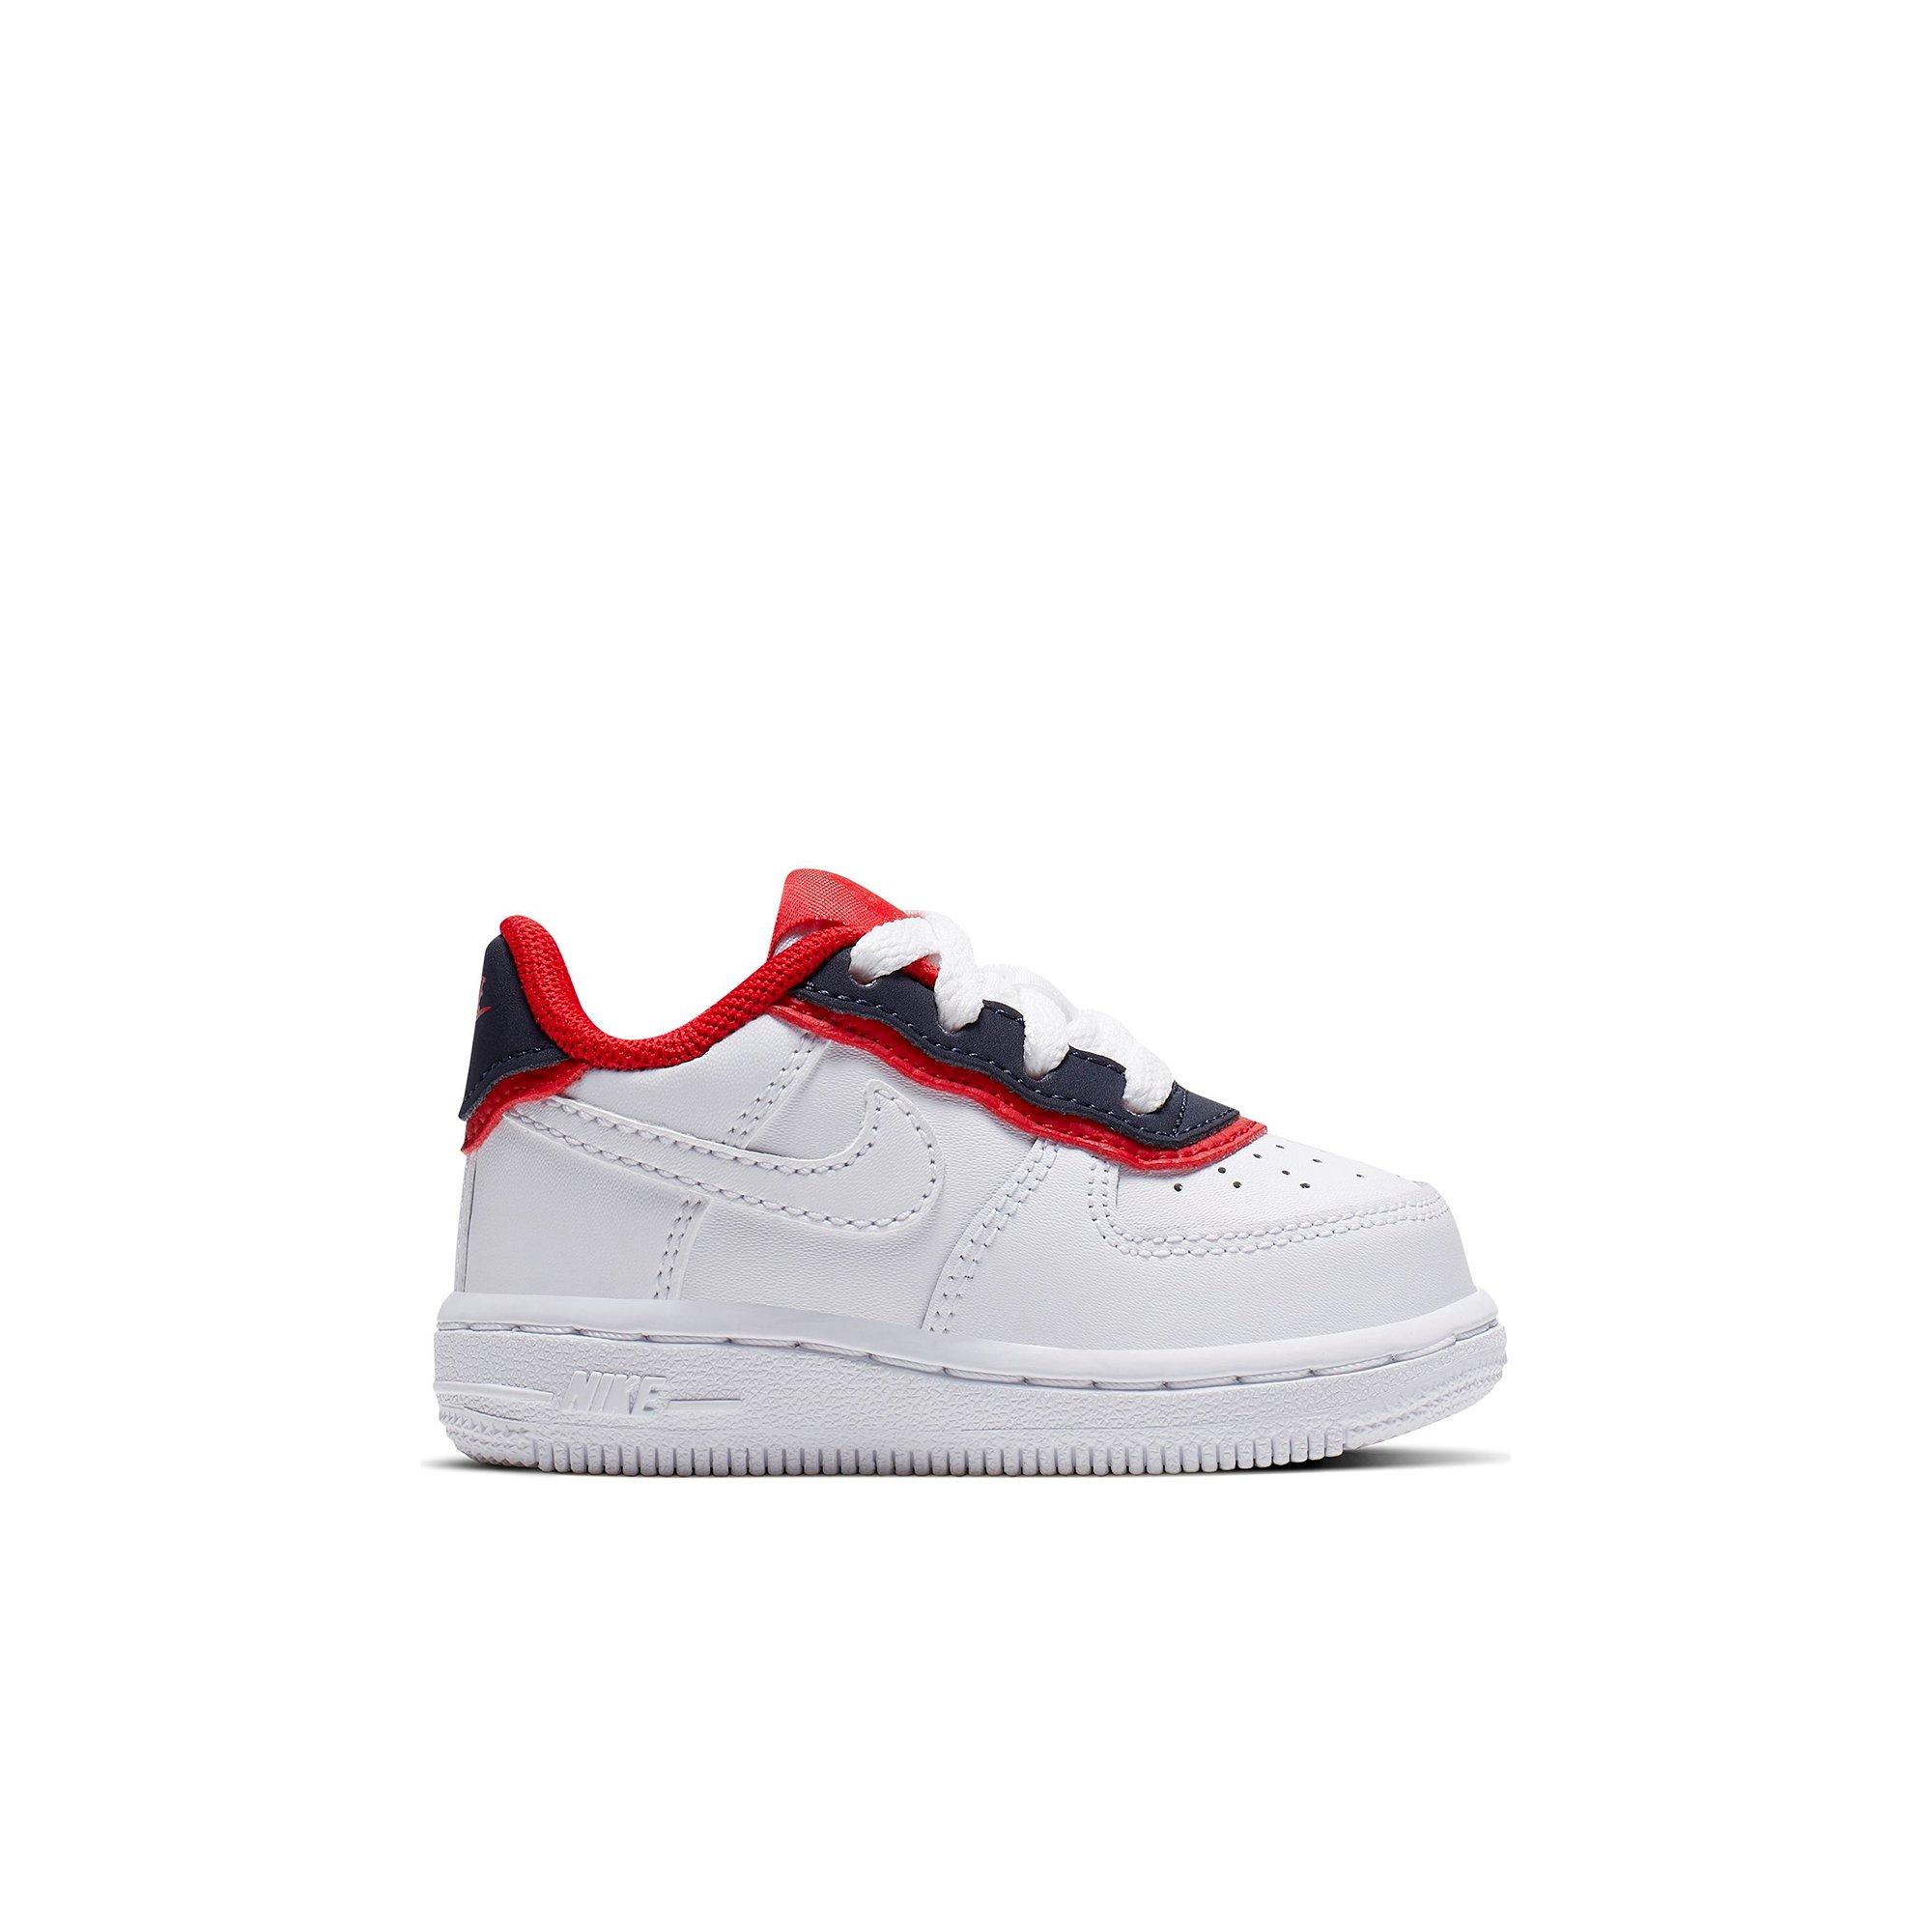 air forces blue white and red